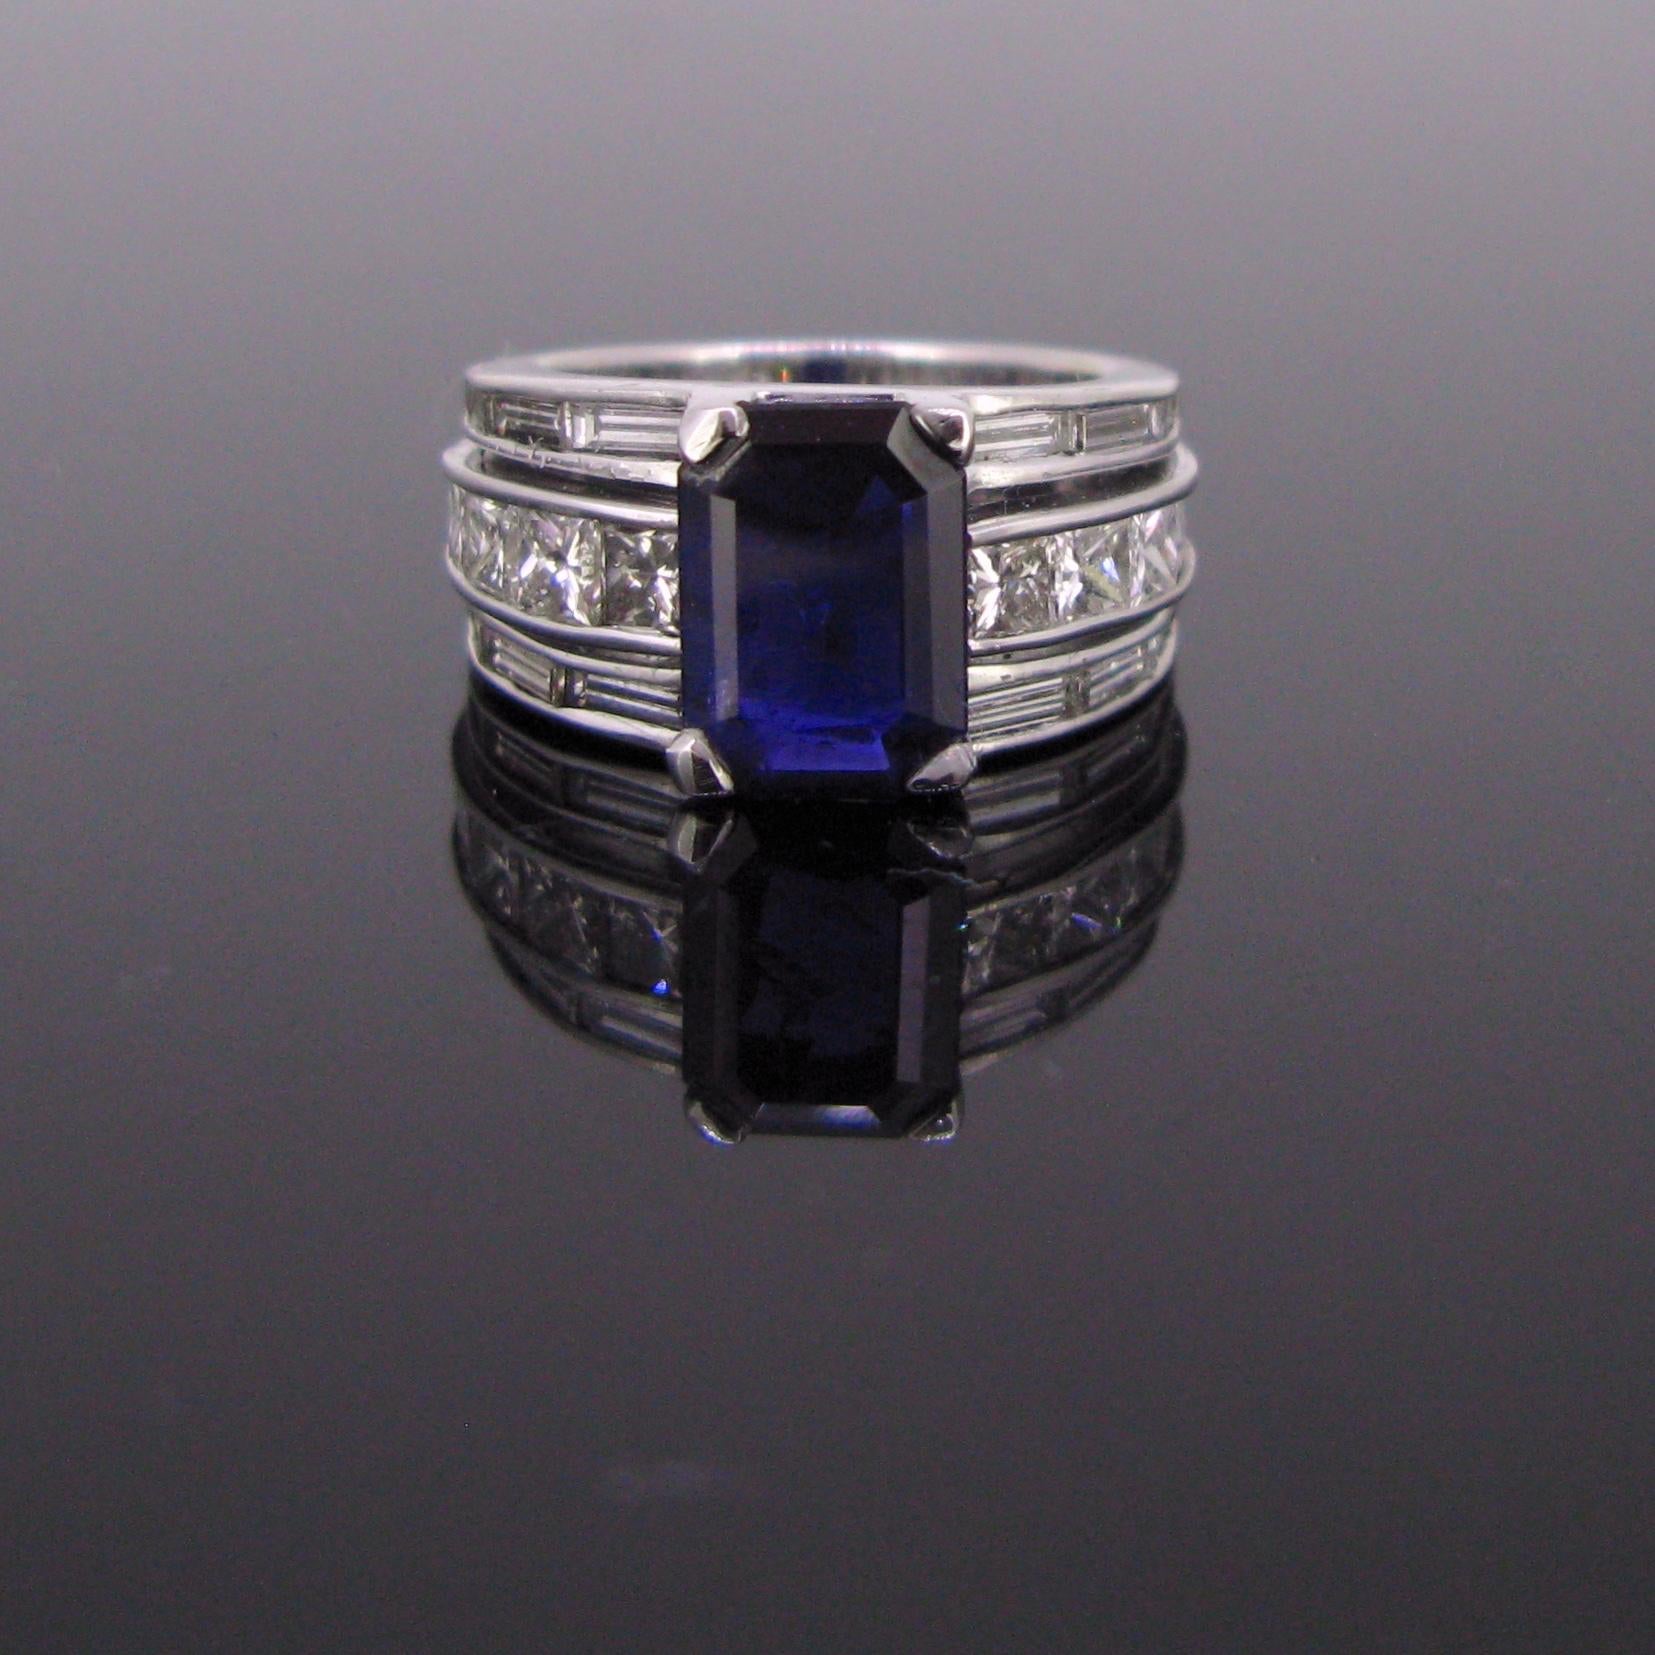 This band ring is fully made in 18kt white gold. It is set with a deep navy blue colour change sapphire weighing 2.91ct. It comes with the testing card for the GCS lab (London) stating it is from Ceylon, with no indication of heating. It is